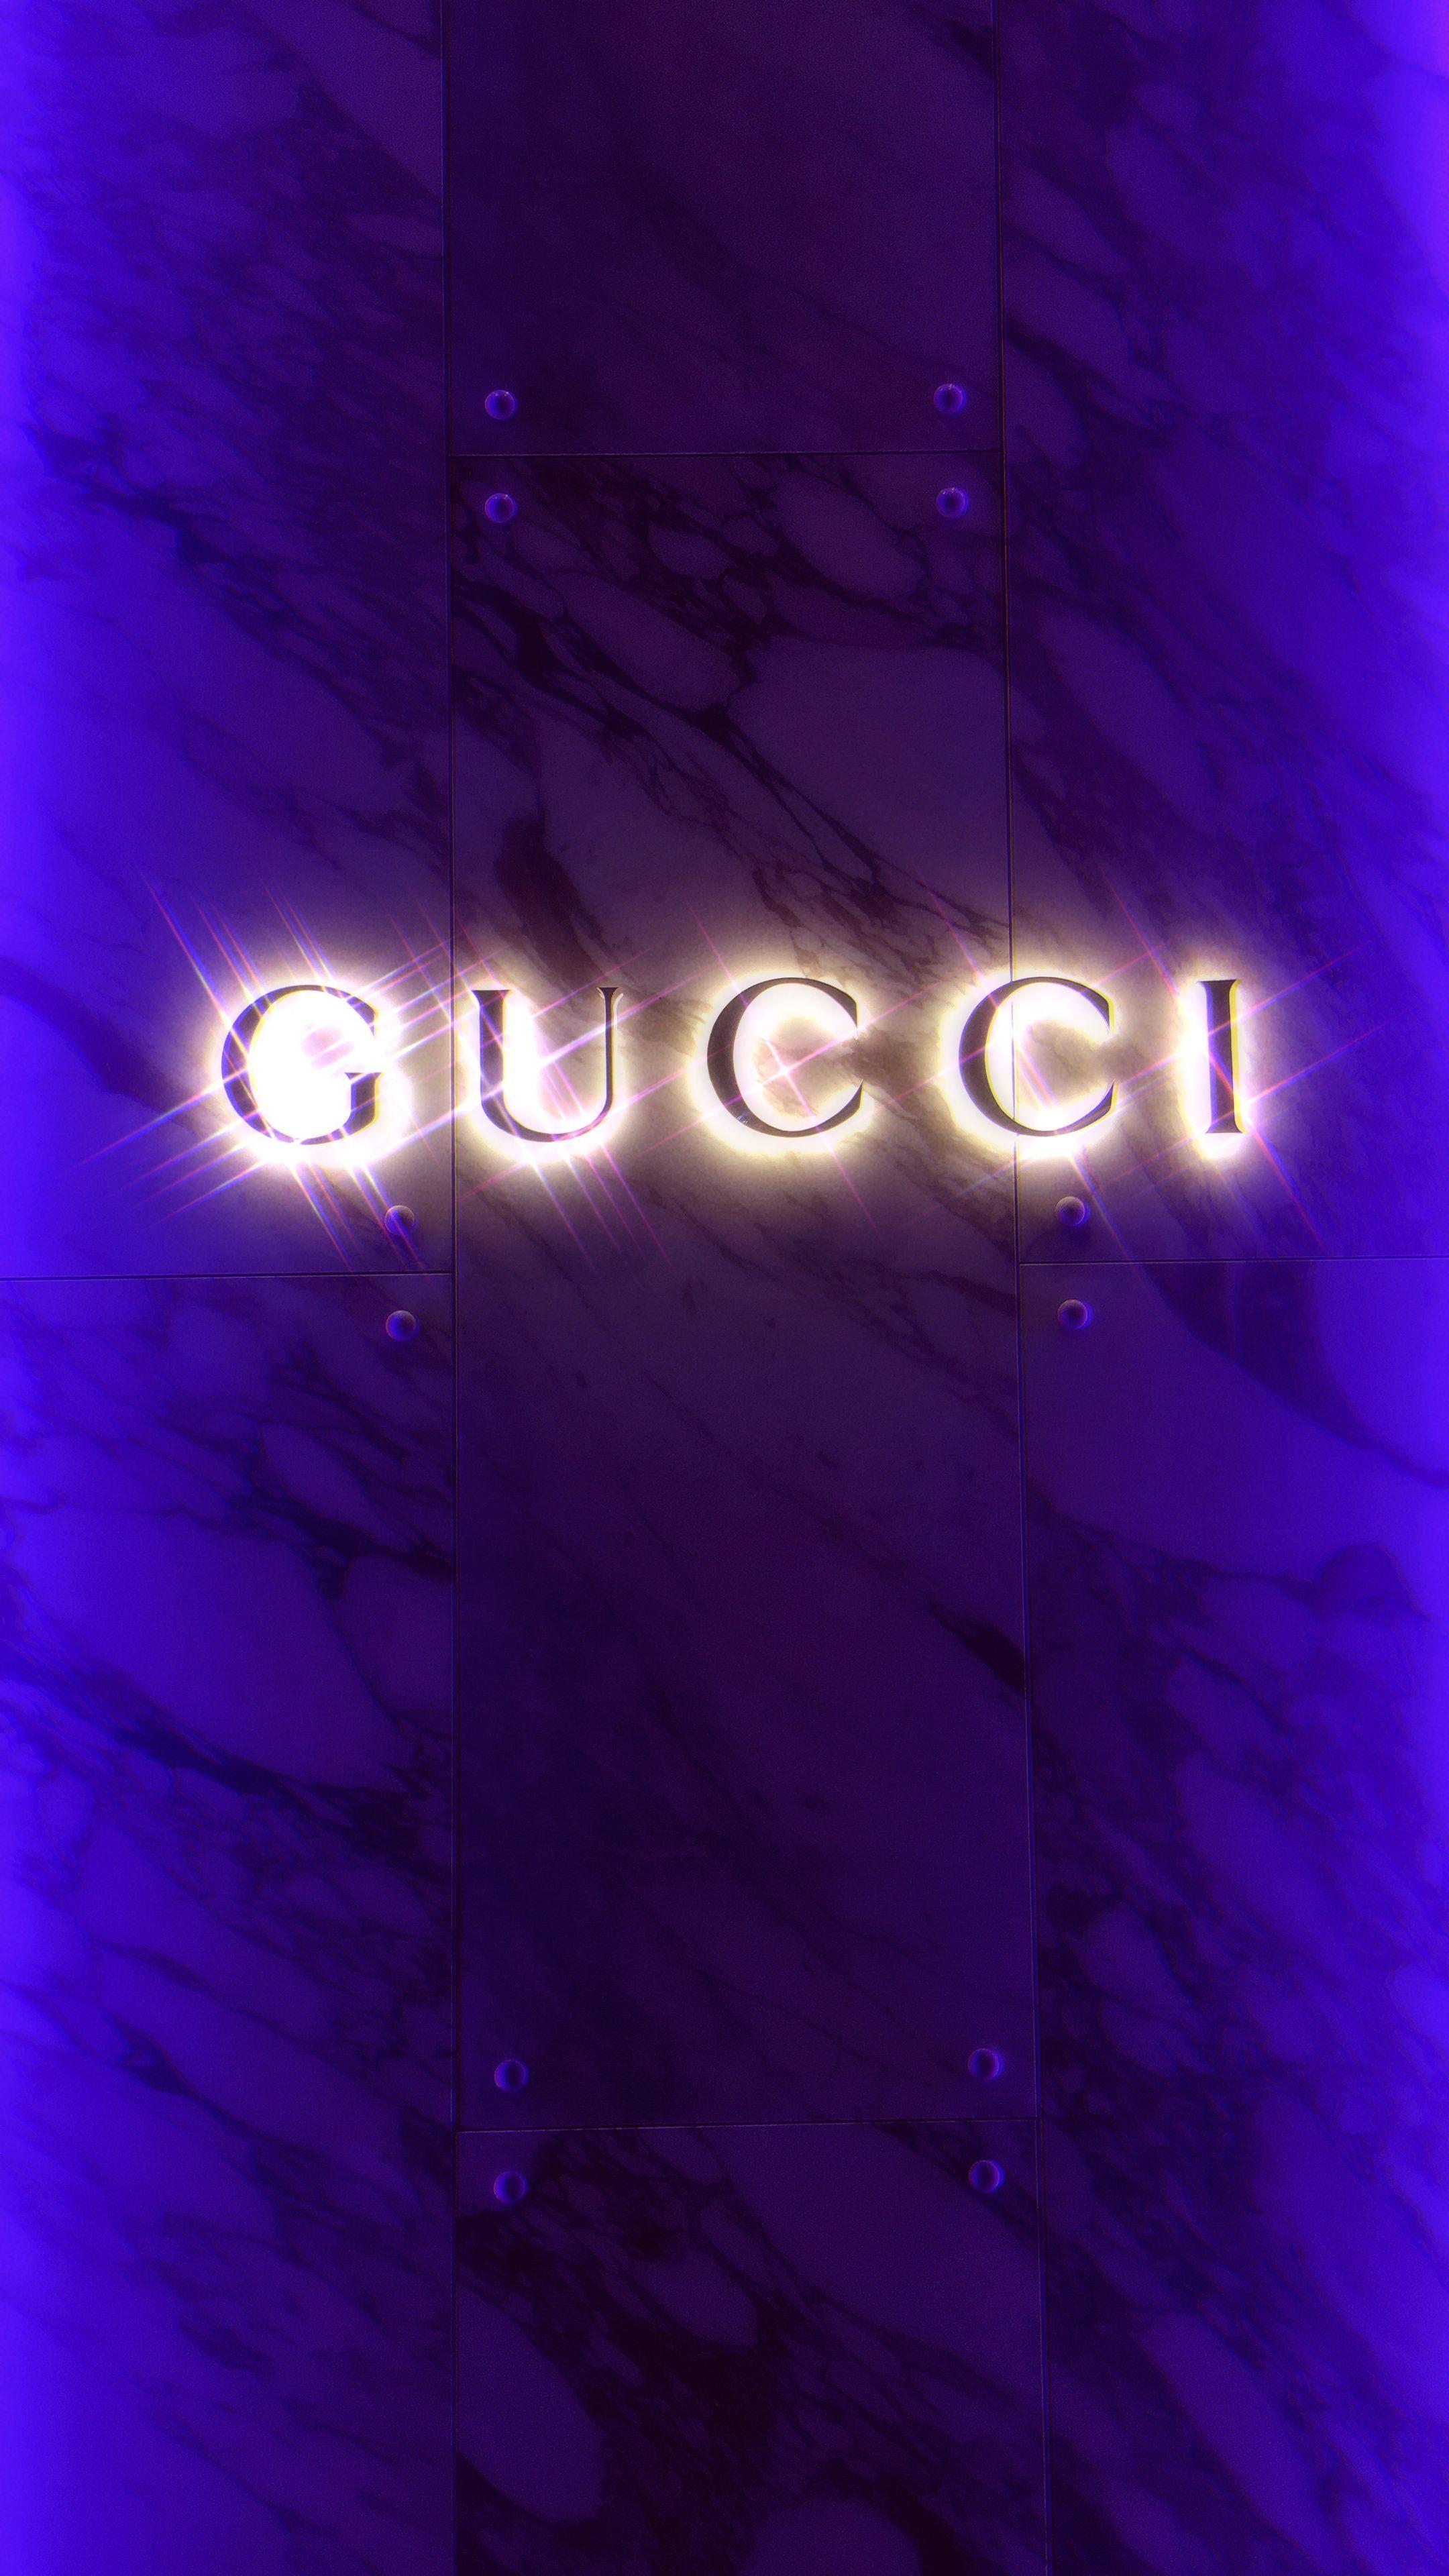 Purple Gucci Wallpapers Top Free Purple Gucci Backgrounds Wallpaperaccess Find over 100+ of the best free gucci images. purple gucci wallpapers top free